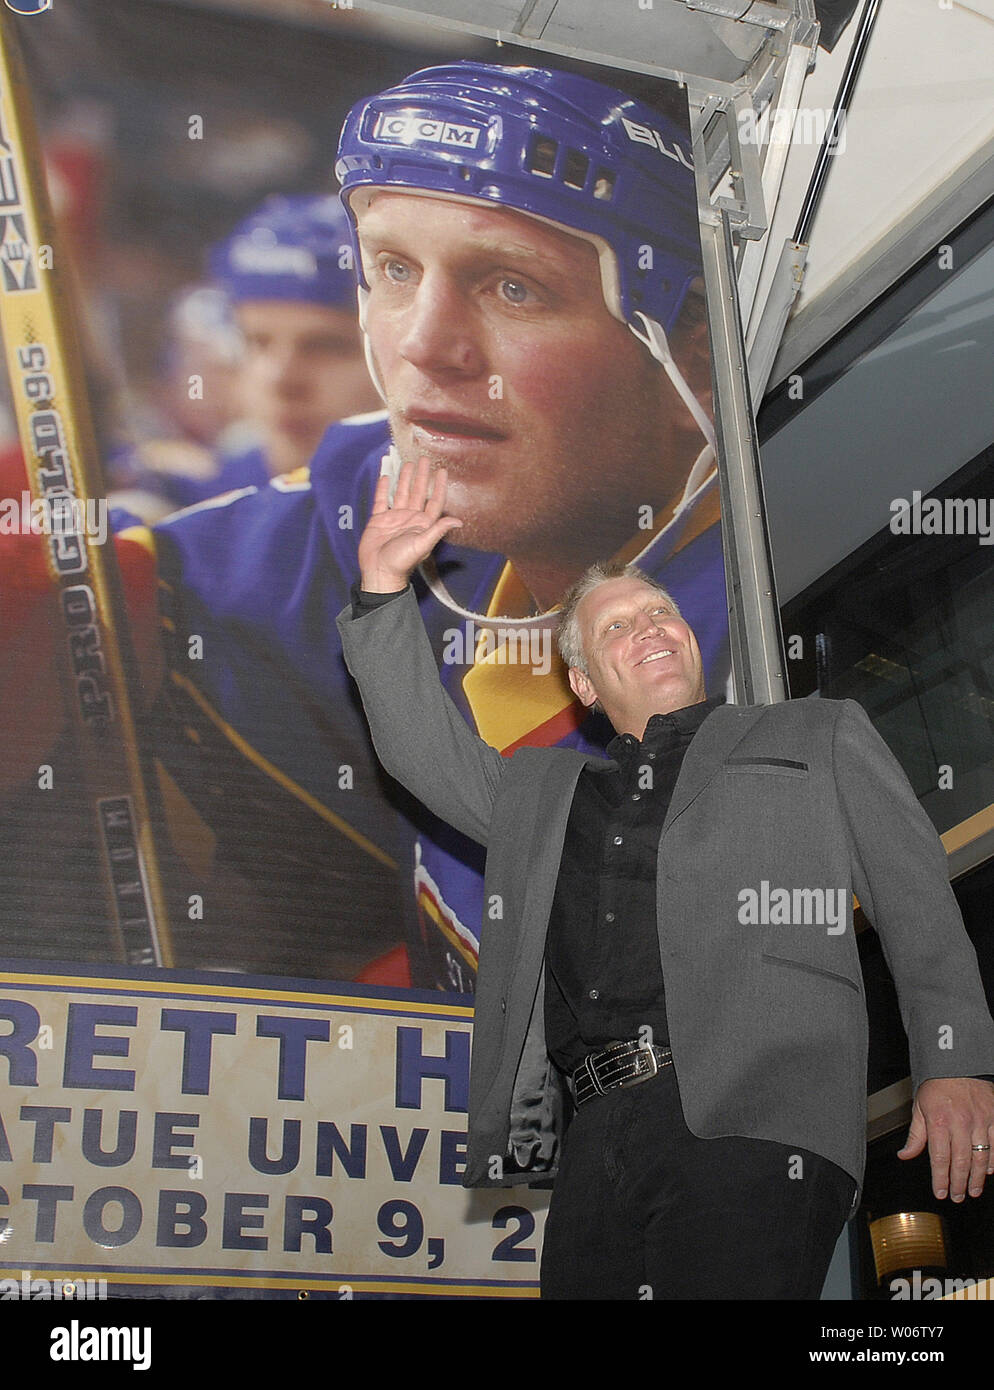 Former St. Louis Blues player Brett Hull waves as he takes the stage for statue unveiling at the Scottrade Center in St. Louis on October 9, 2010.  UPI/John Boman Jr. Stock Photo